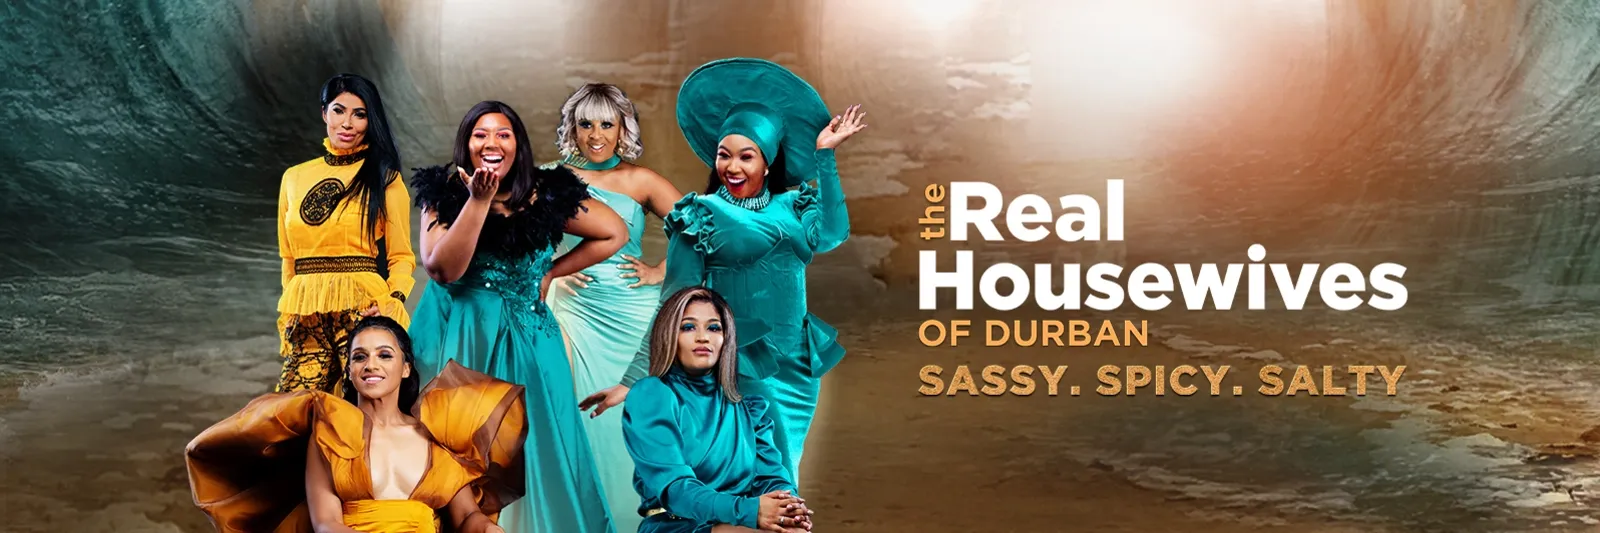 The Real Housewives Of Durban S04 (Episode 10 - 12 Added) 39